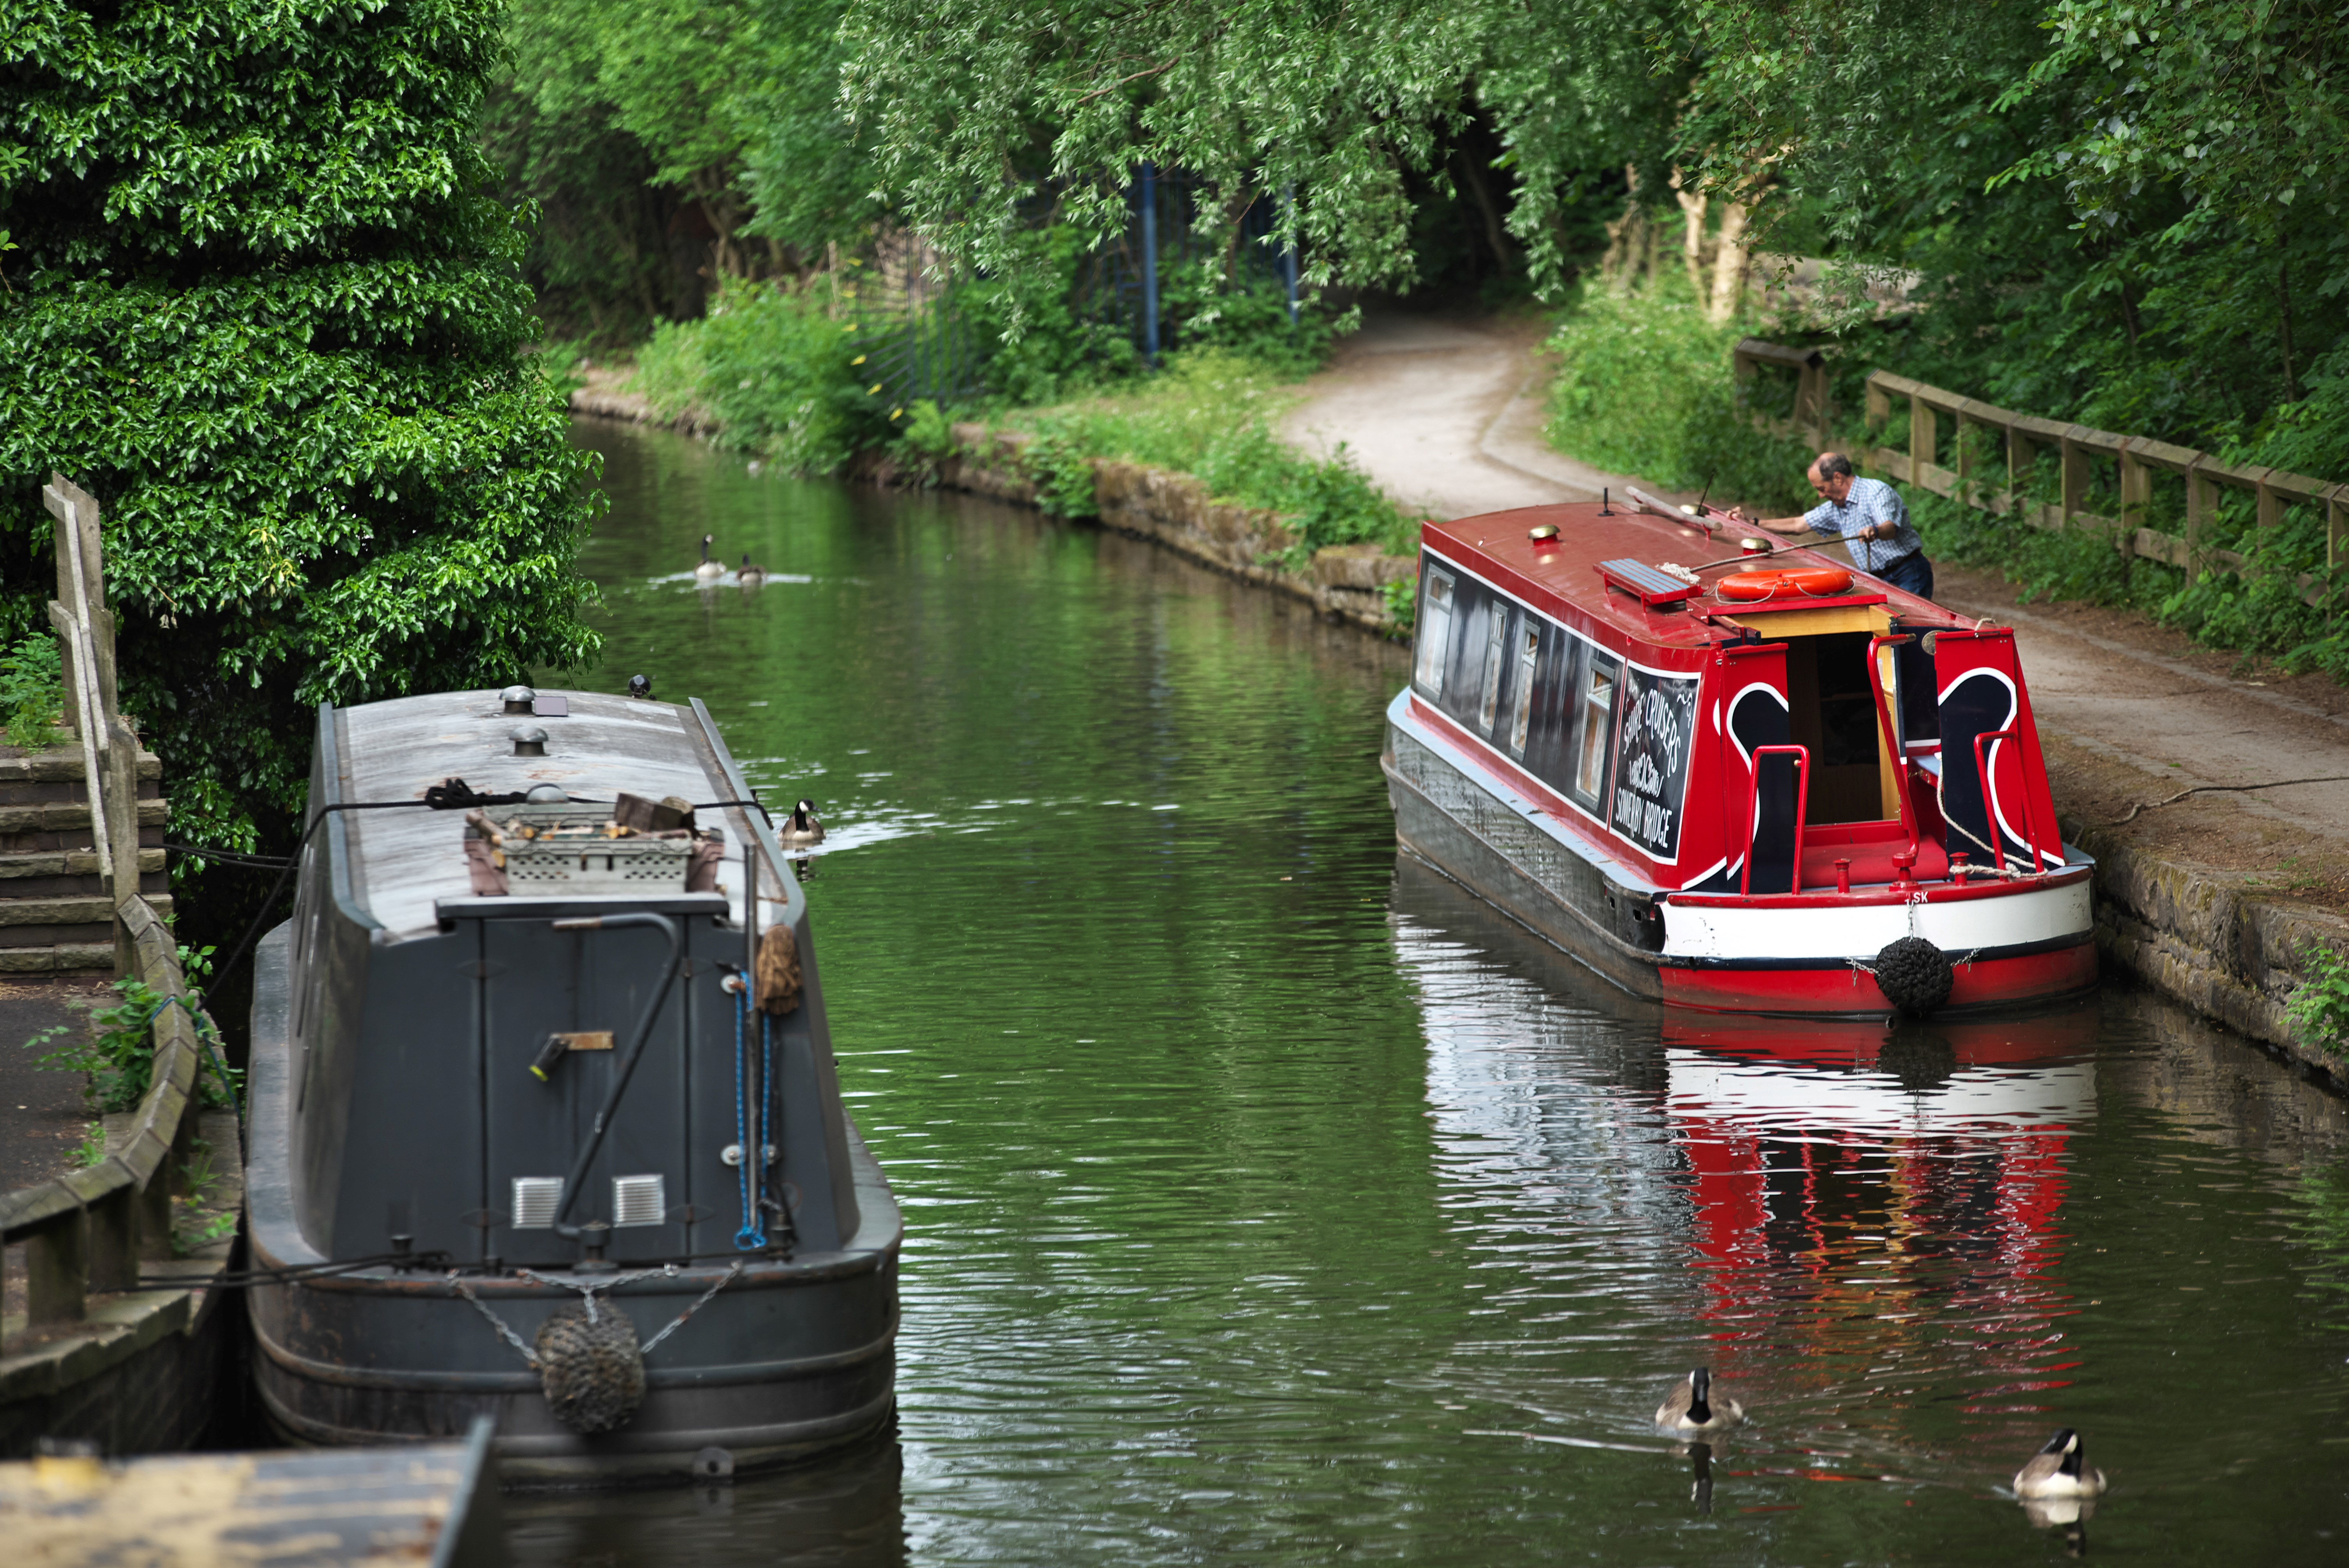 Two canal barges parked on a canal.